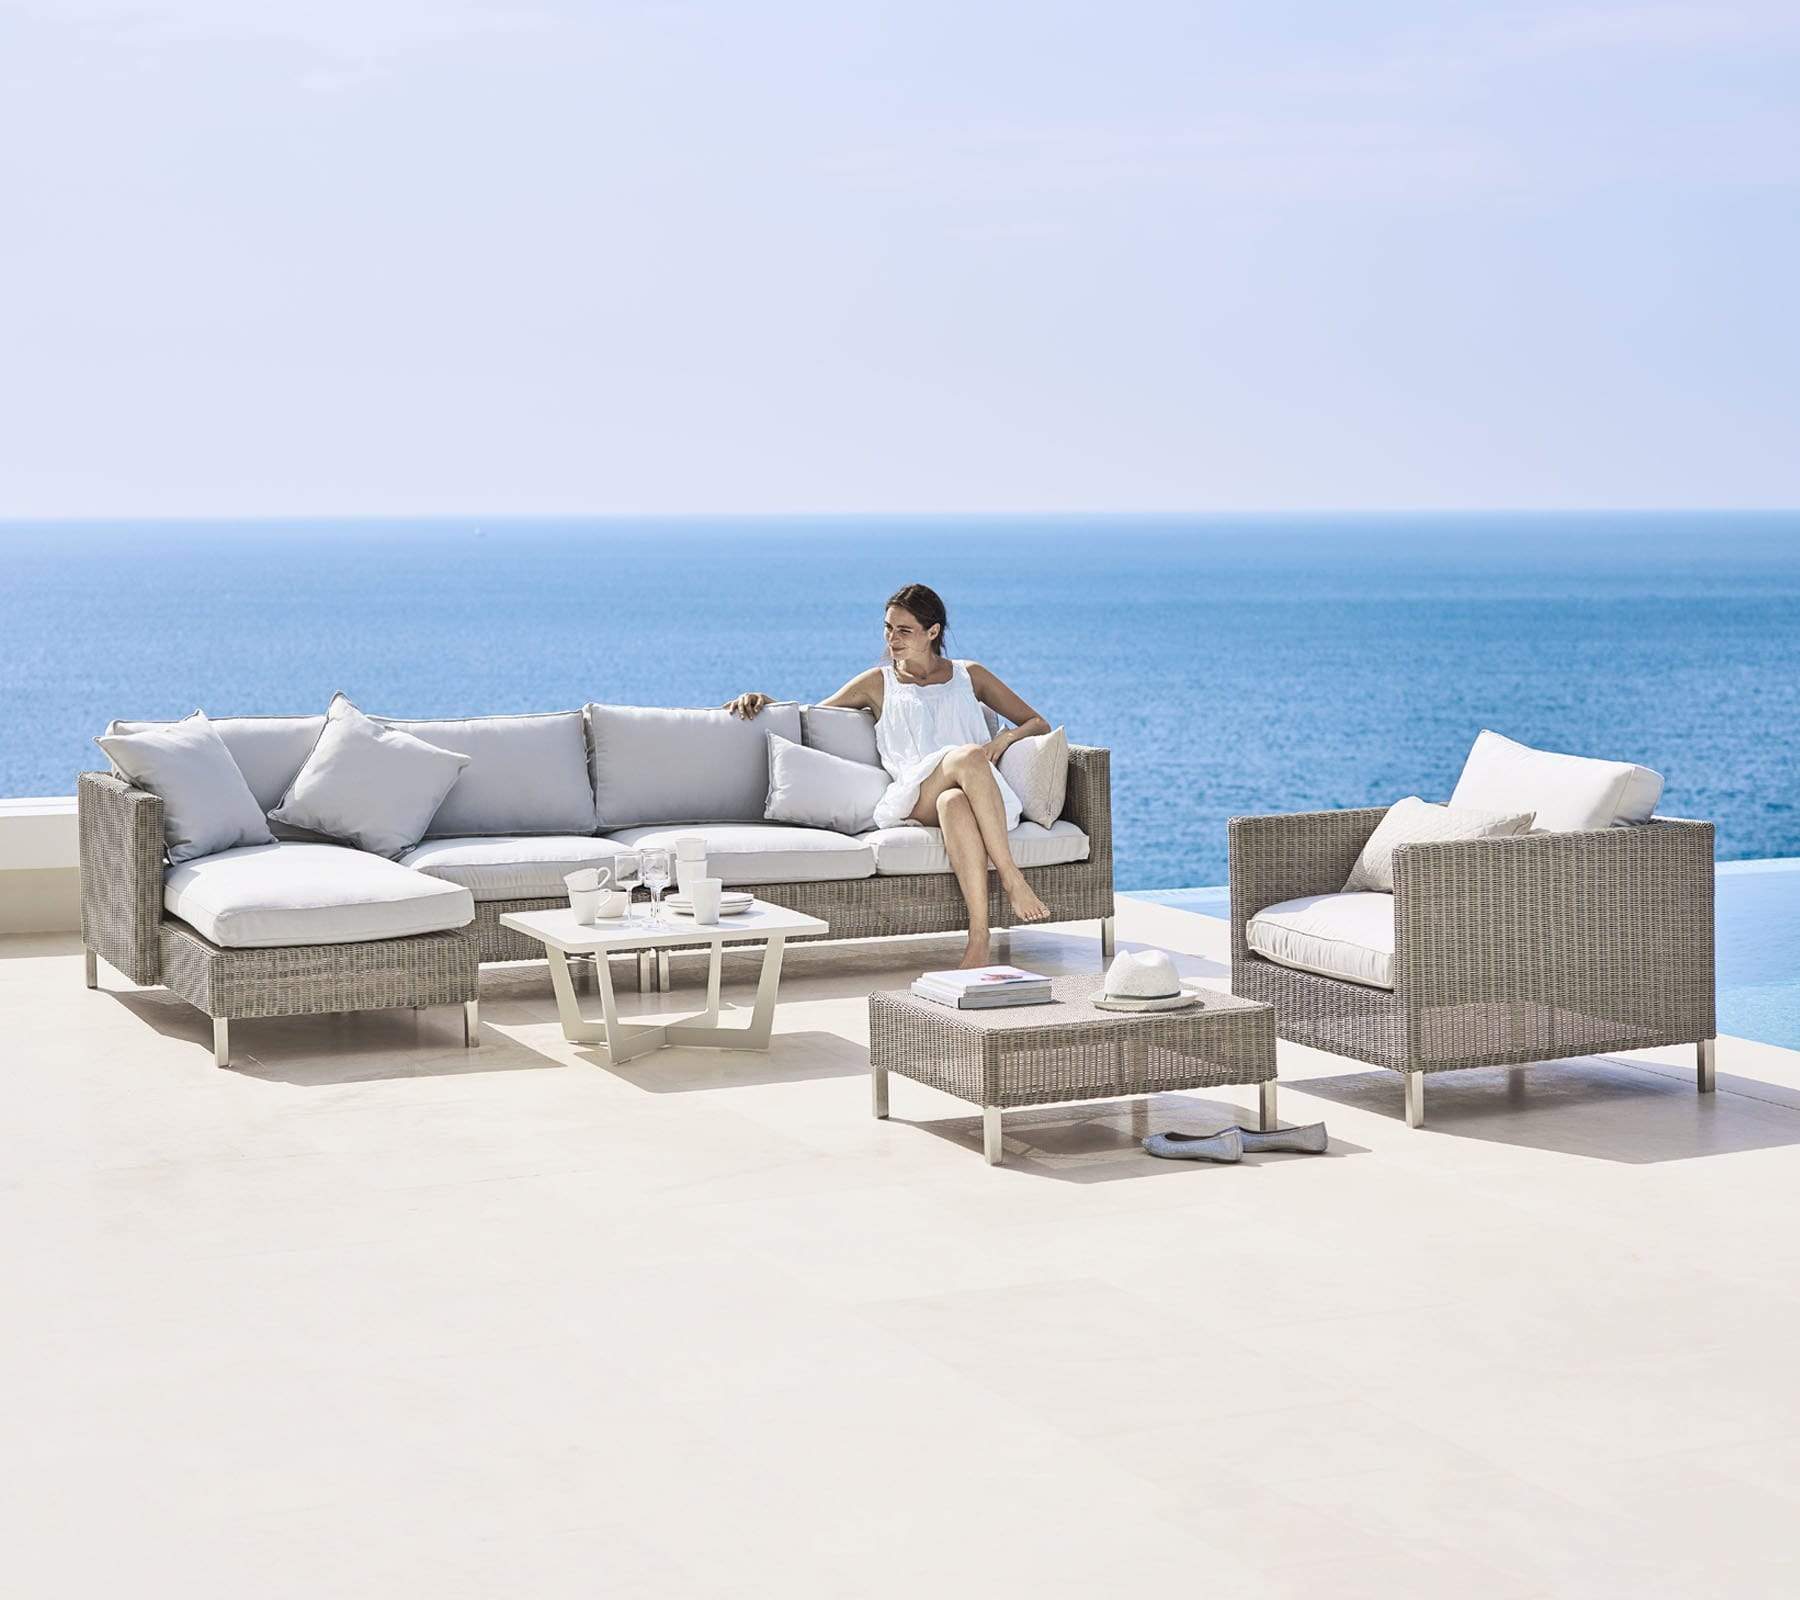 Boxhill's Connect Footstool no cushion lifestyle image beside the pool with Connect Lounge Chair and other module sofa and a woman sitting down